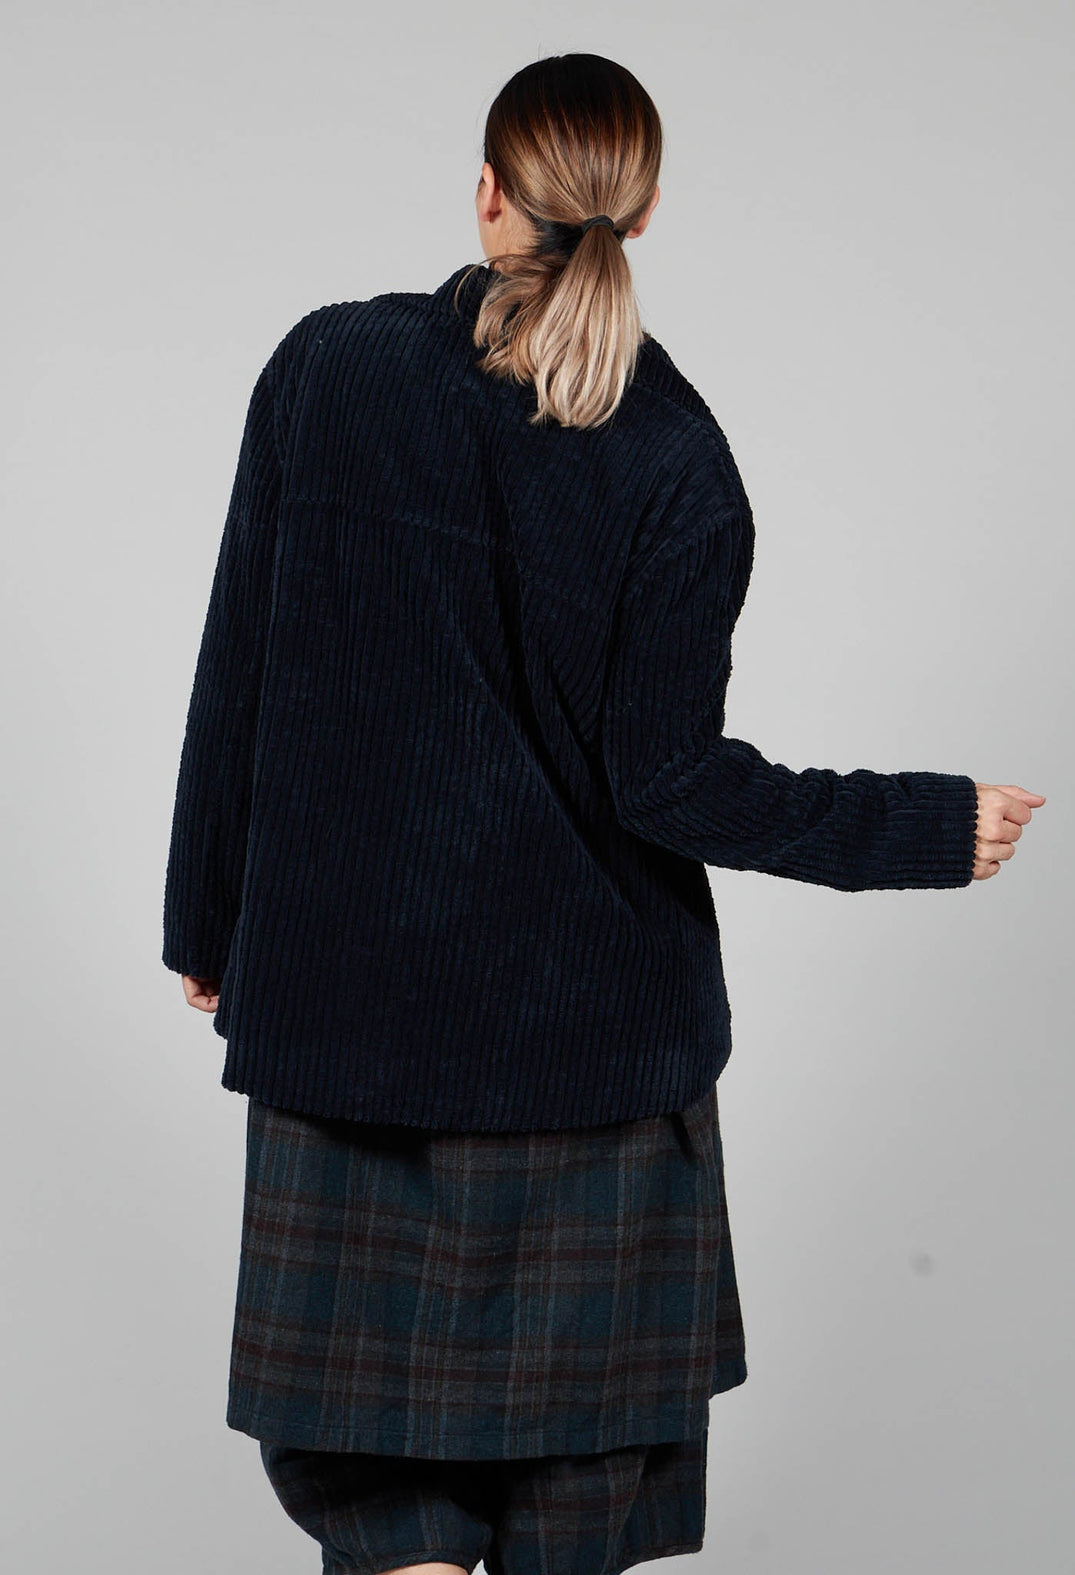 Cotton Curduroy Double Breasted Coat in Dark Blue